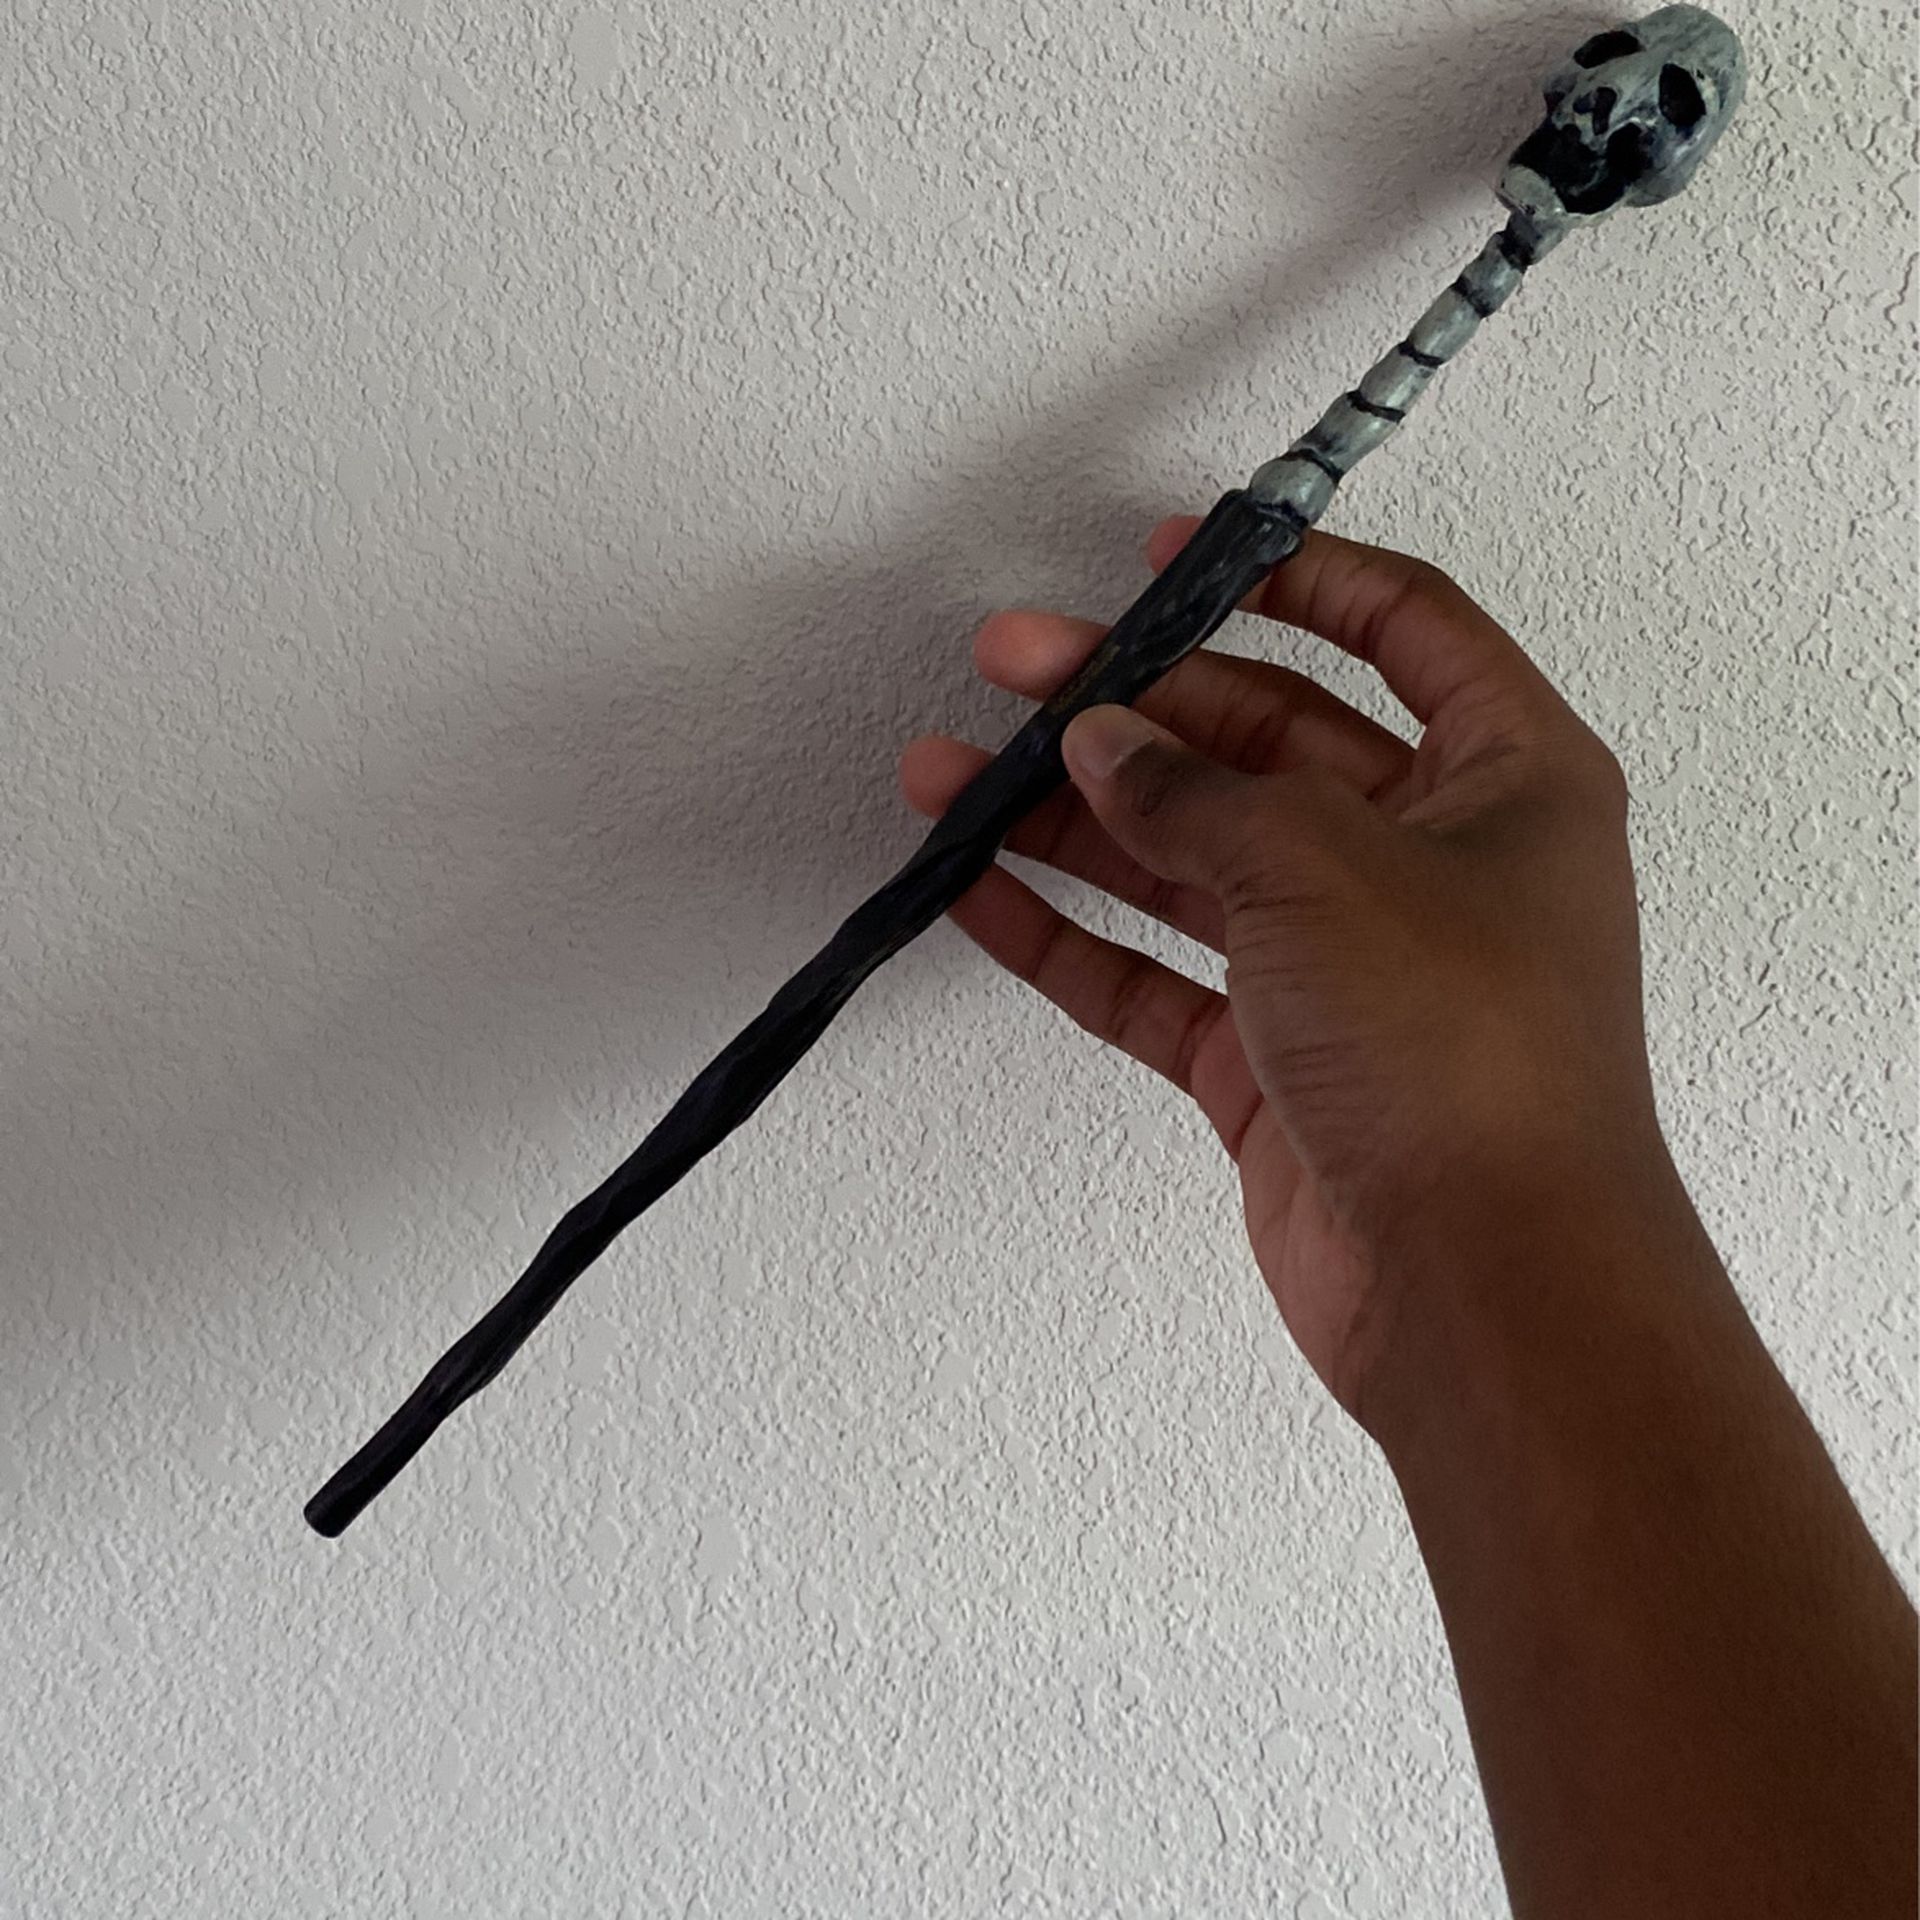 official harry potter wand